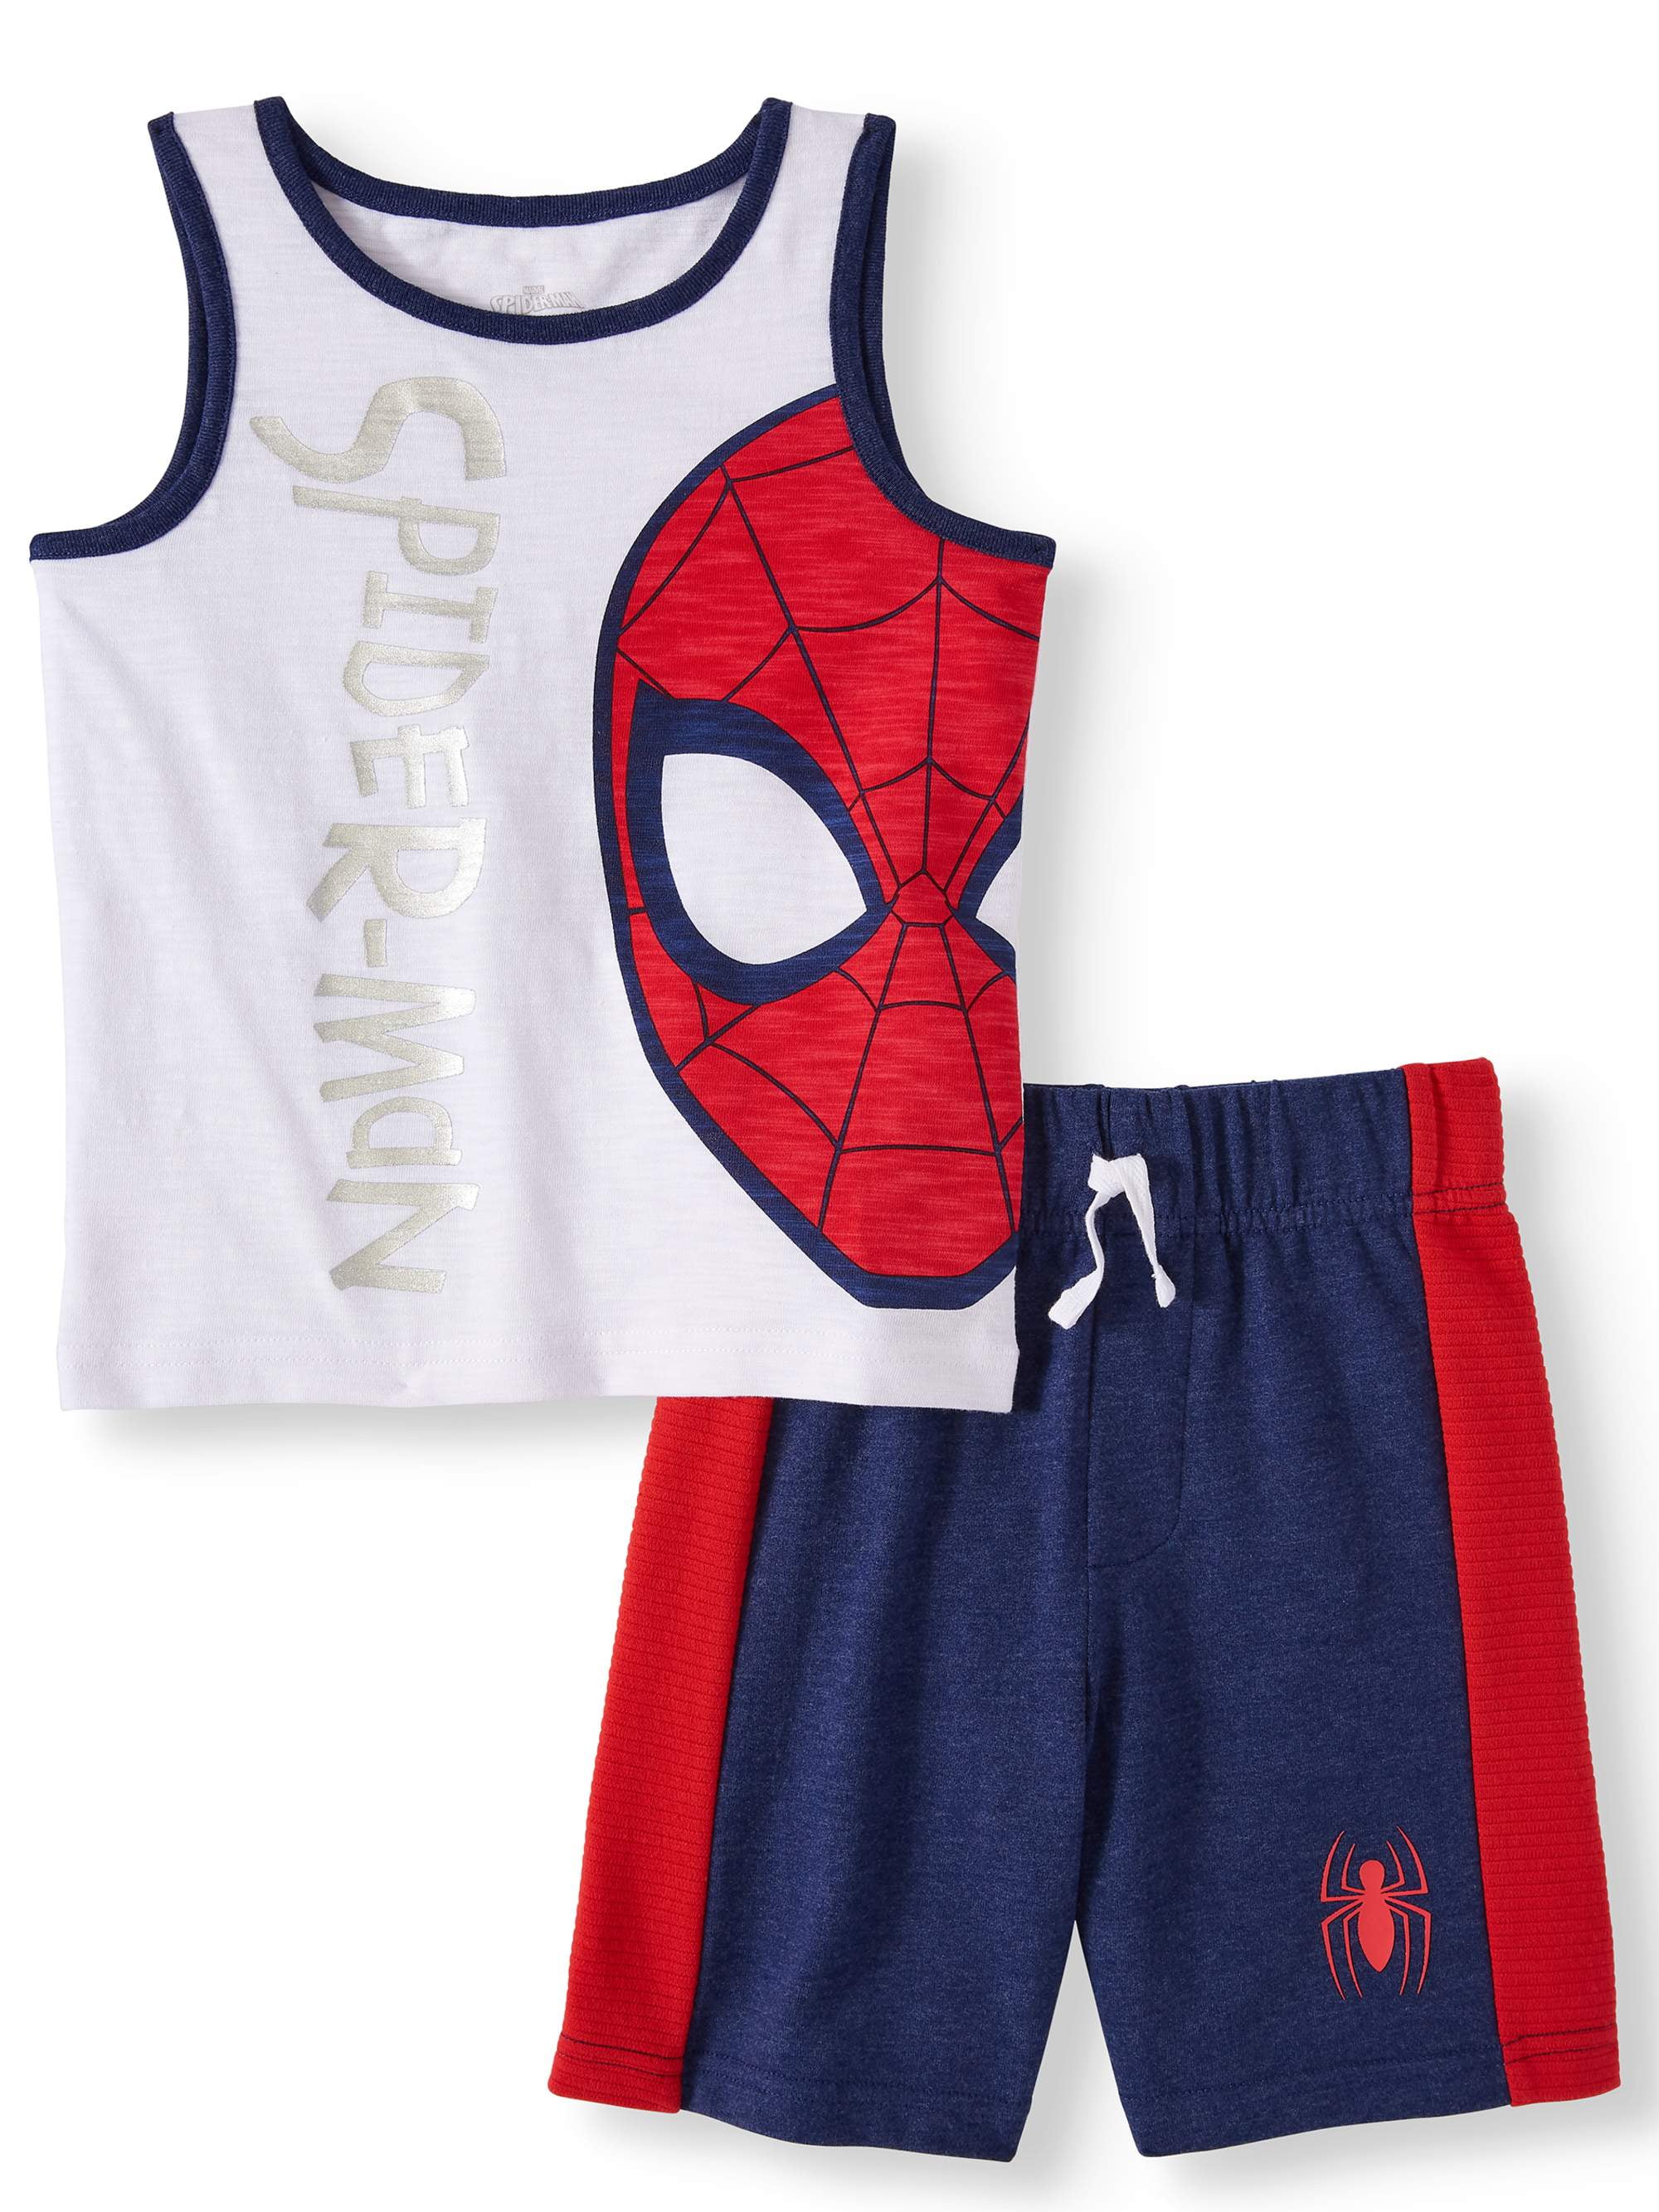 Details about  / 2 tank tops-Batman and Spiderman Toddler Boys 3D Graphic Tank Tops Size 5T NWT